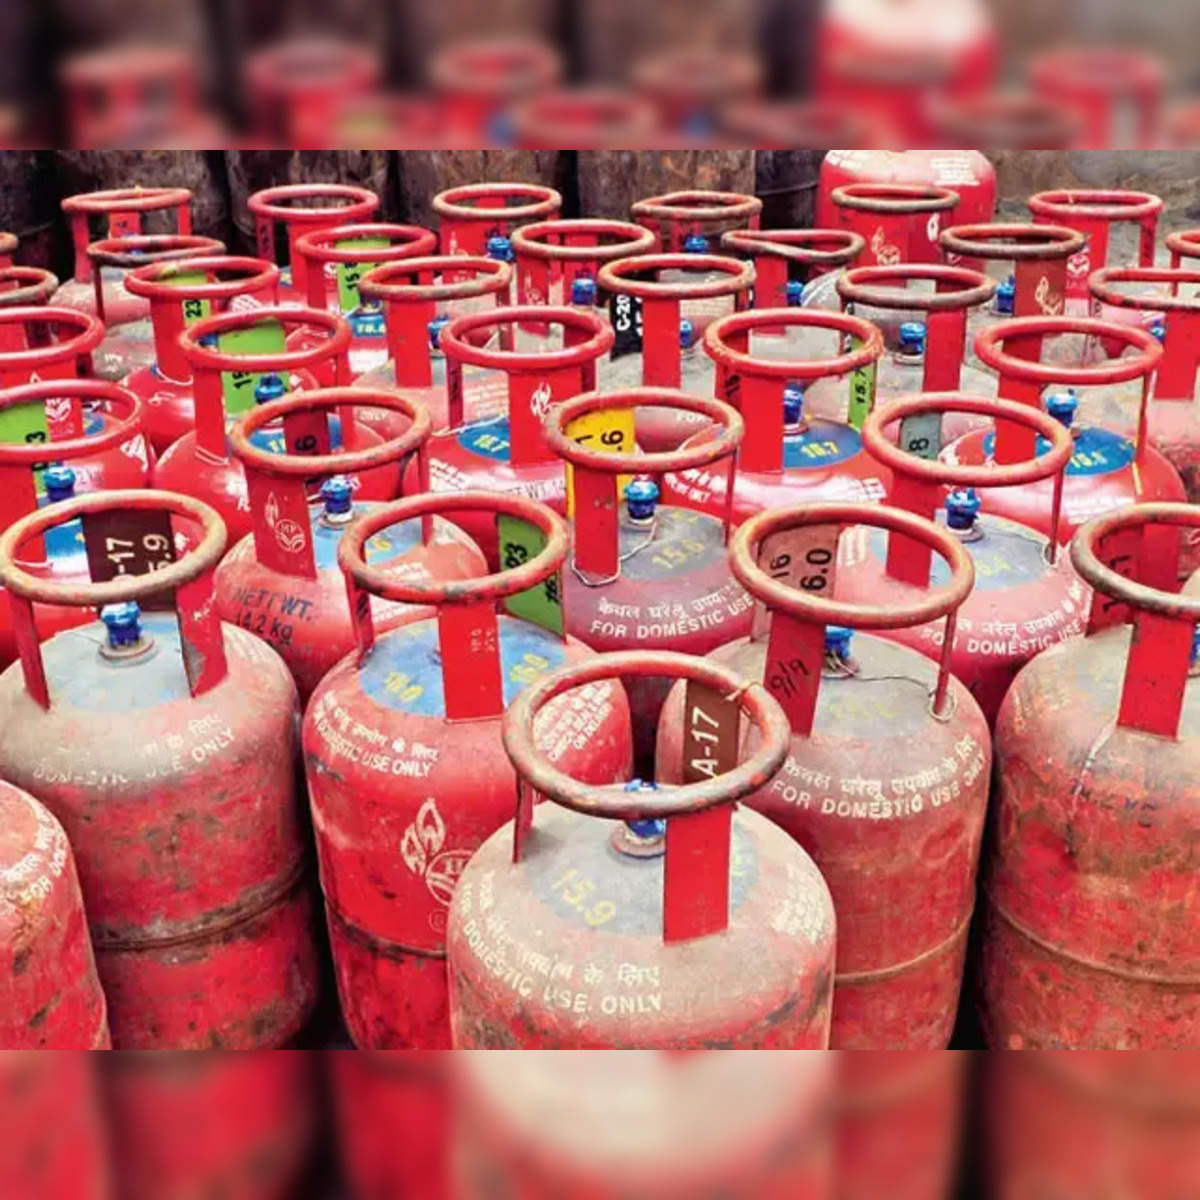 imported LPG: Share of imported LPG in cylinders rises - The